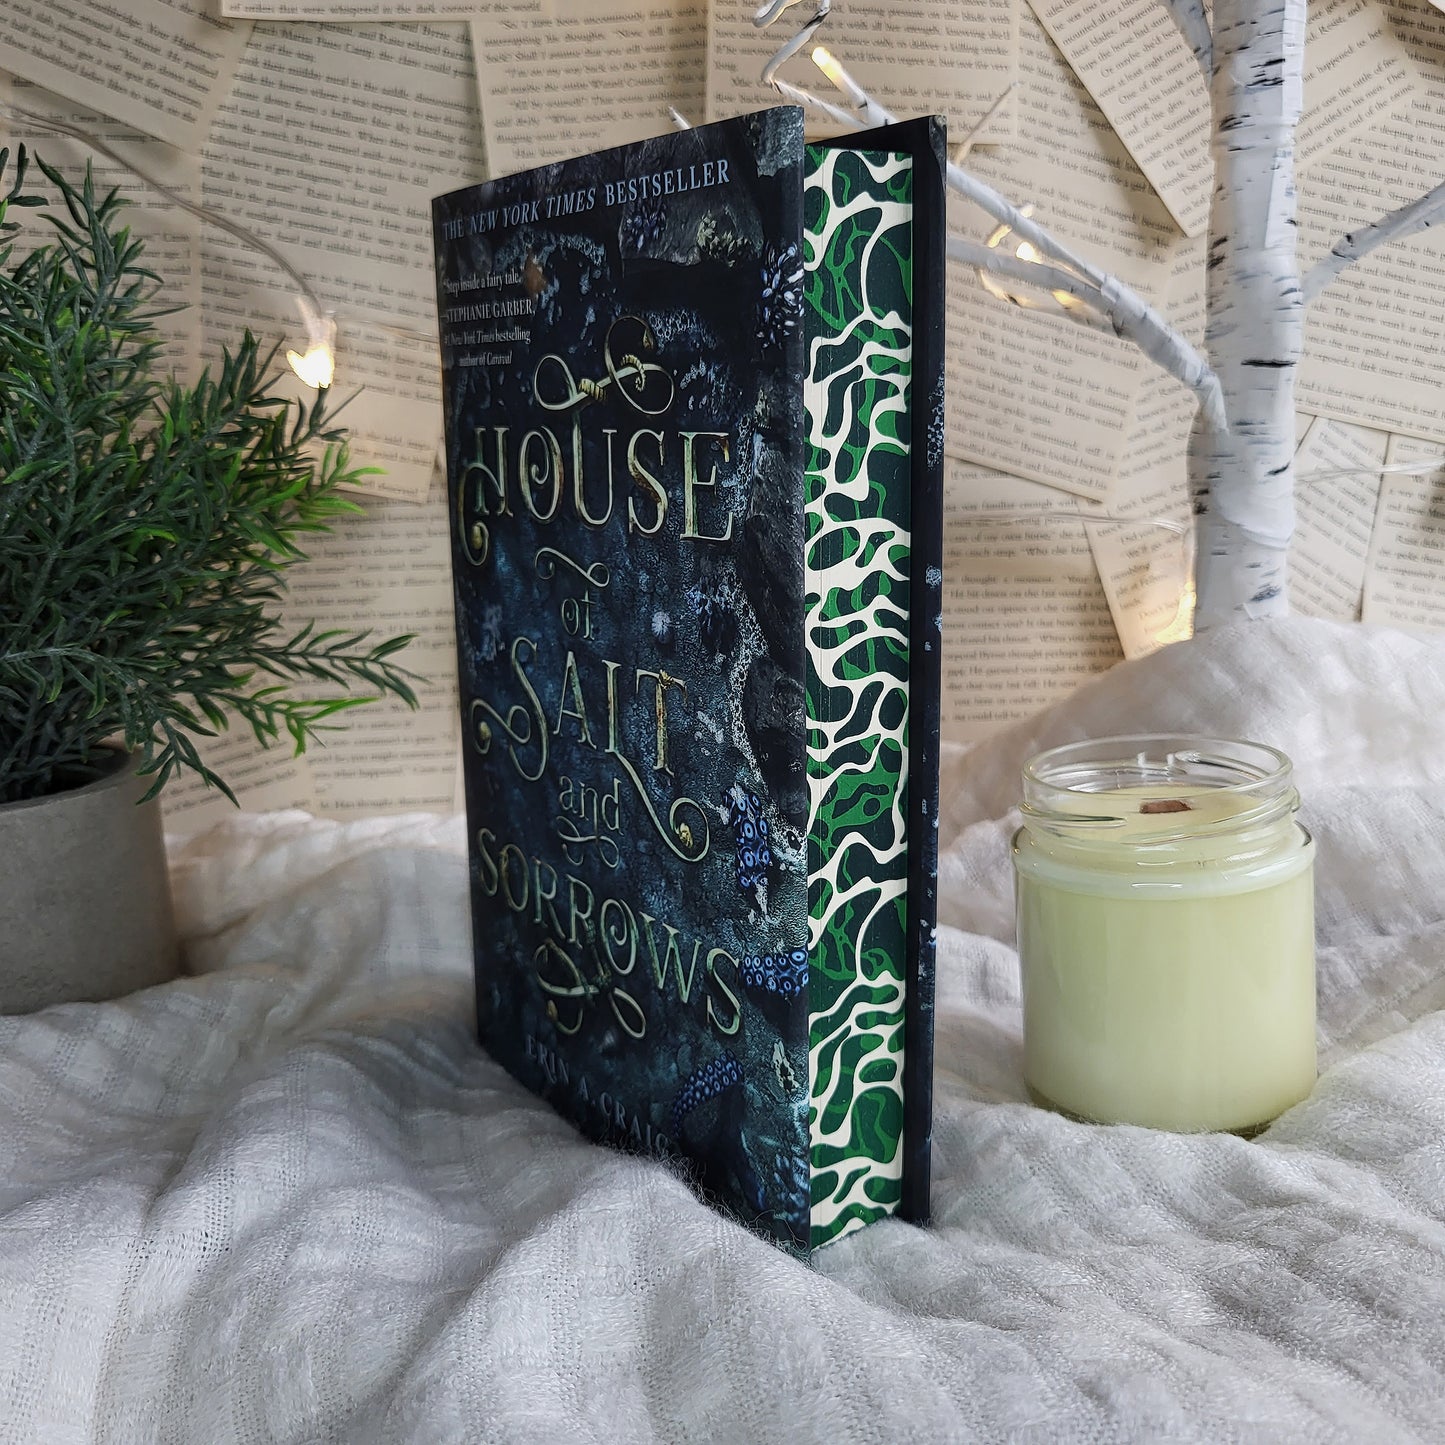 House of Salt and Sorrows/ House of Roots and Ruin